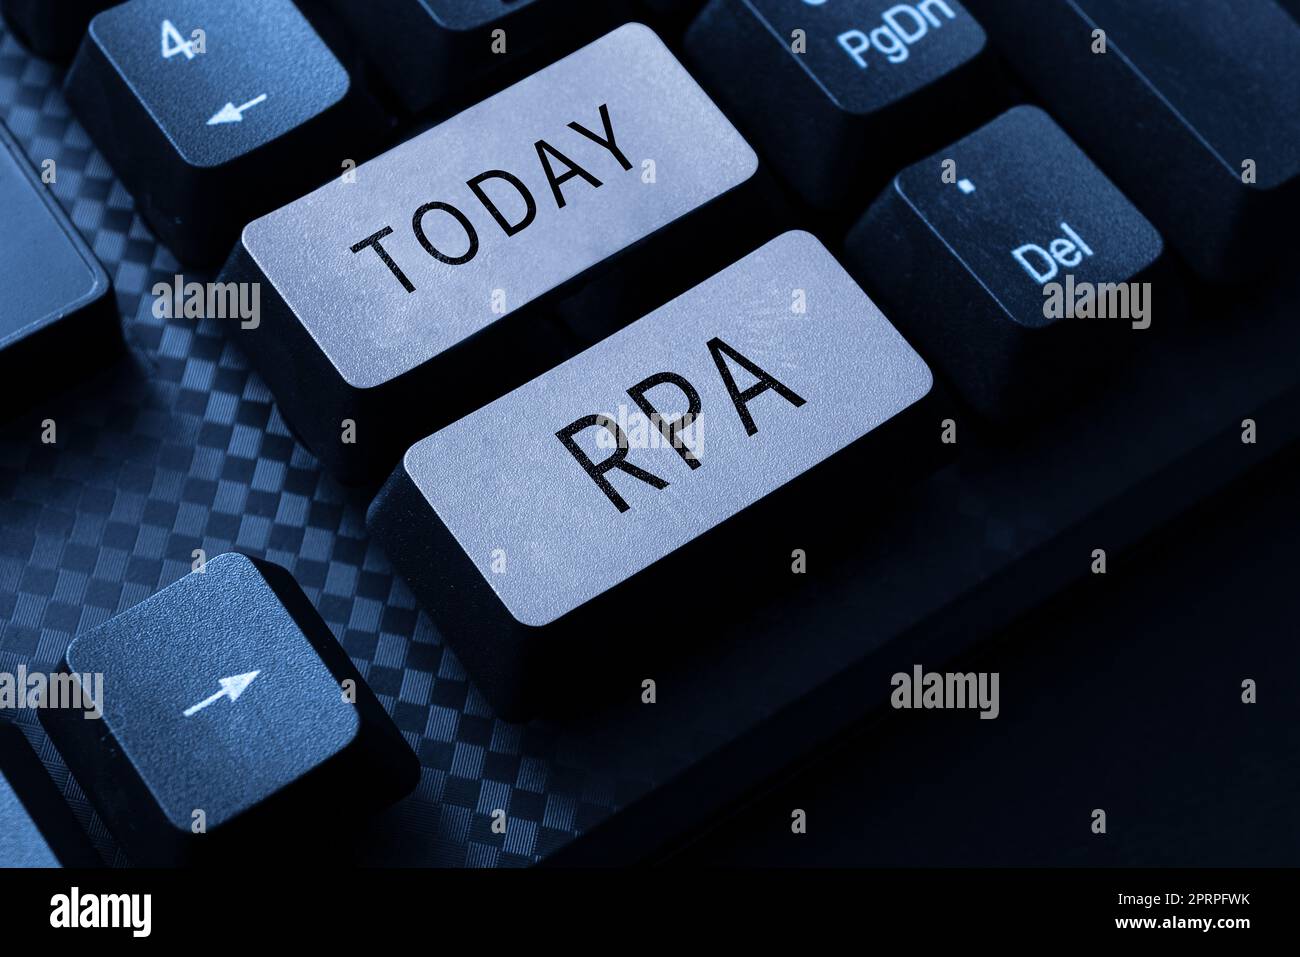 Inspiration showing sign Rpa, Business concept robotic process automation form business process automation technology Stock Photo